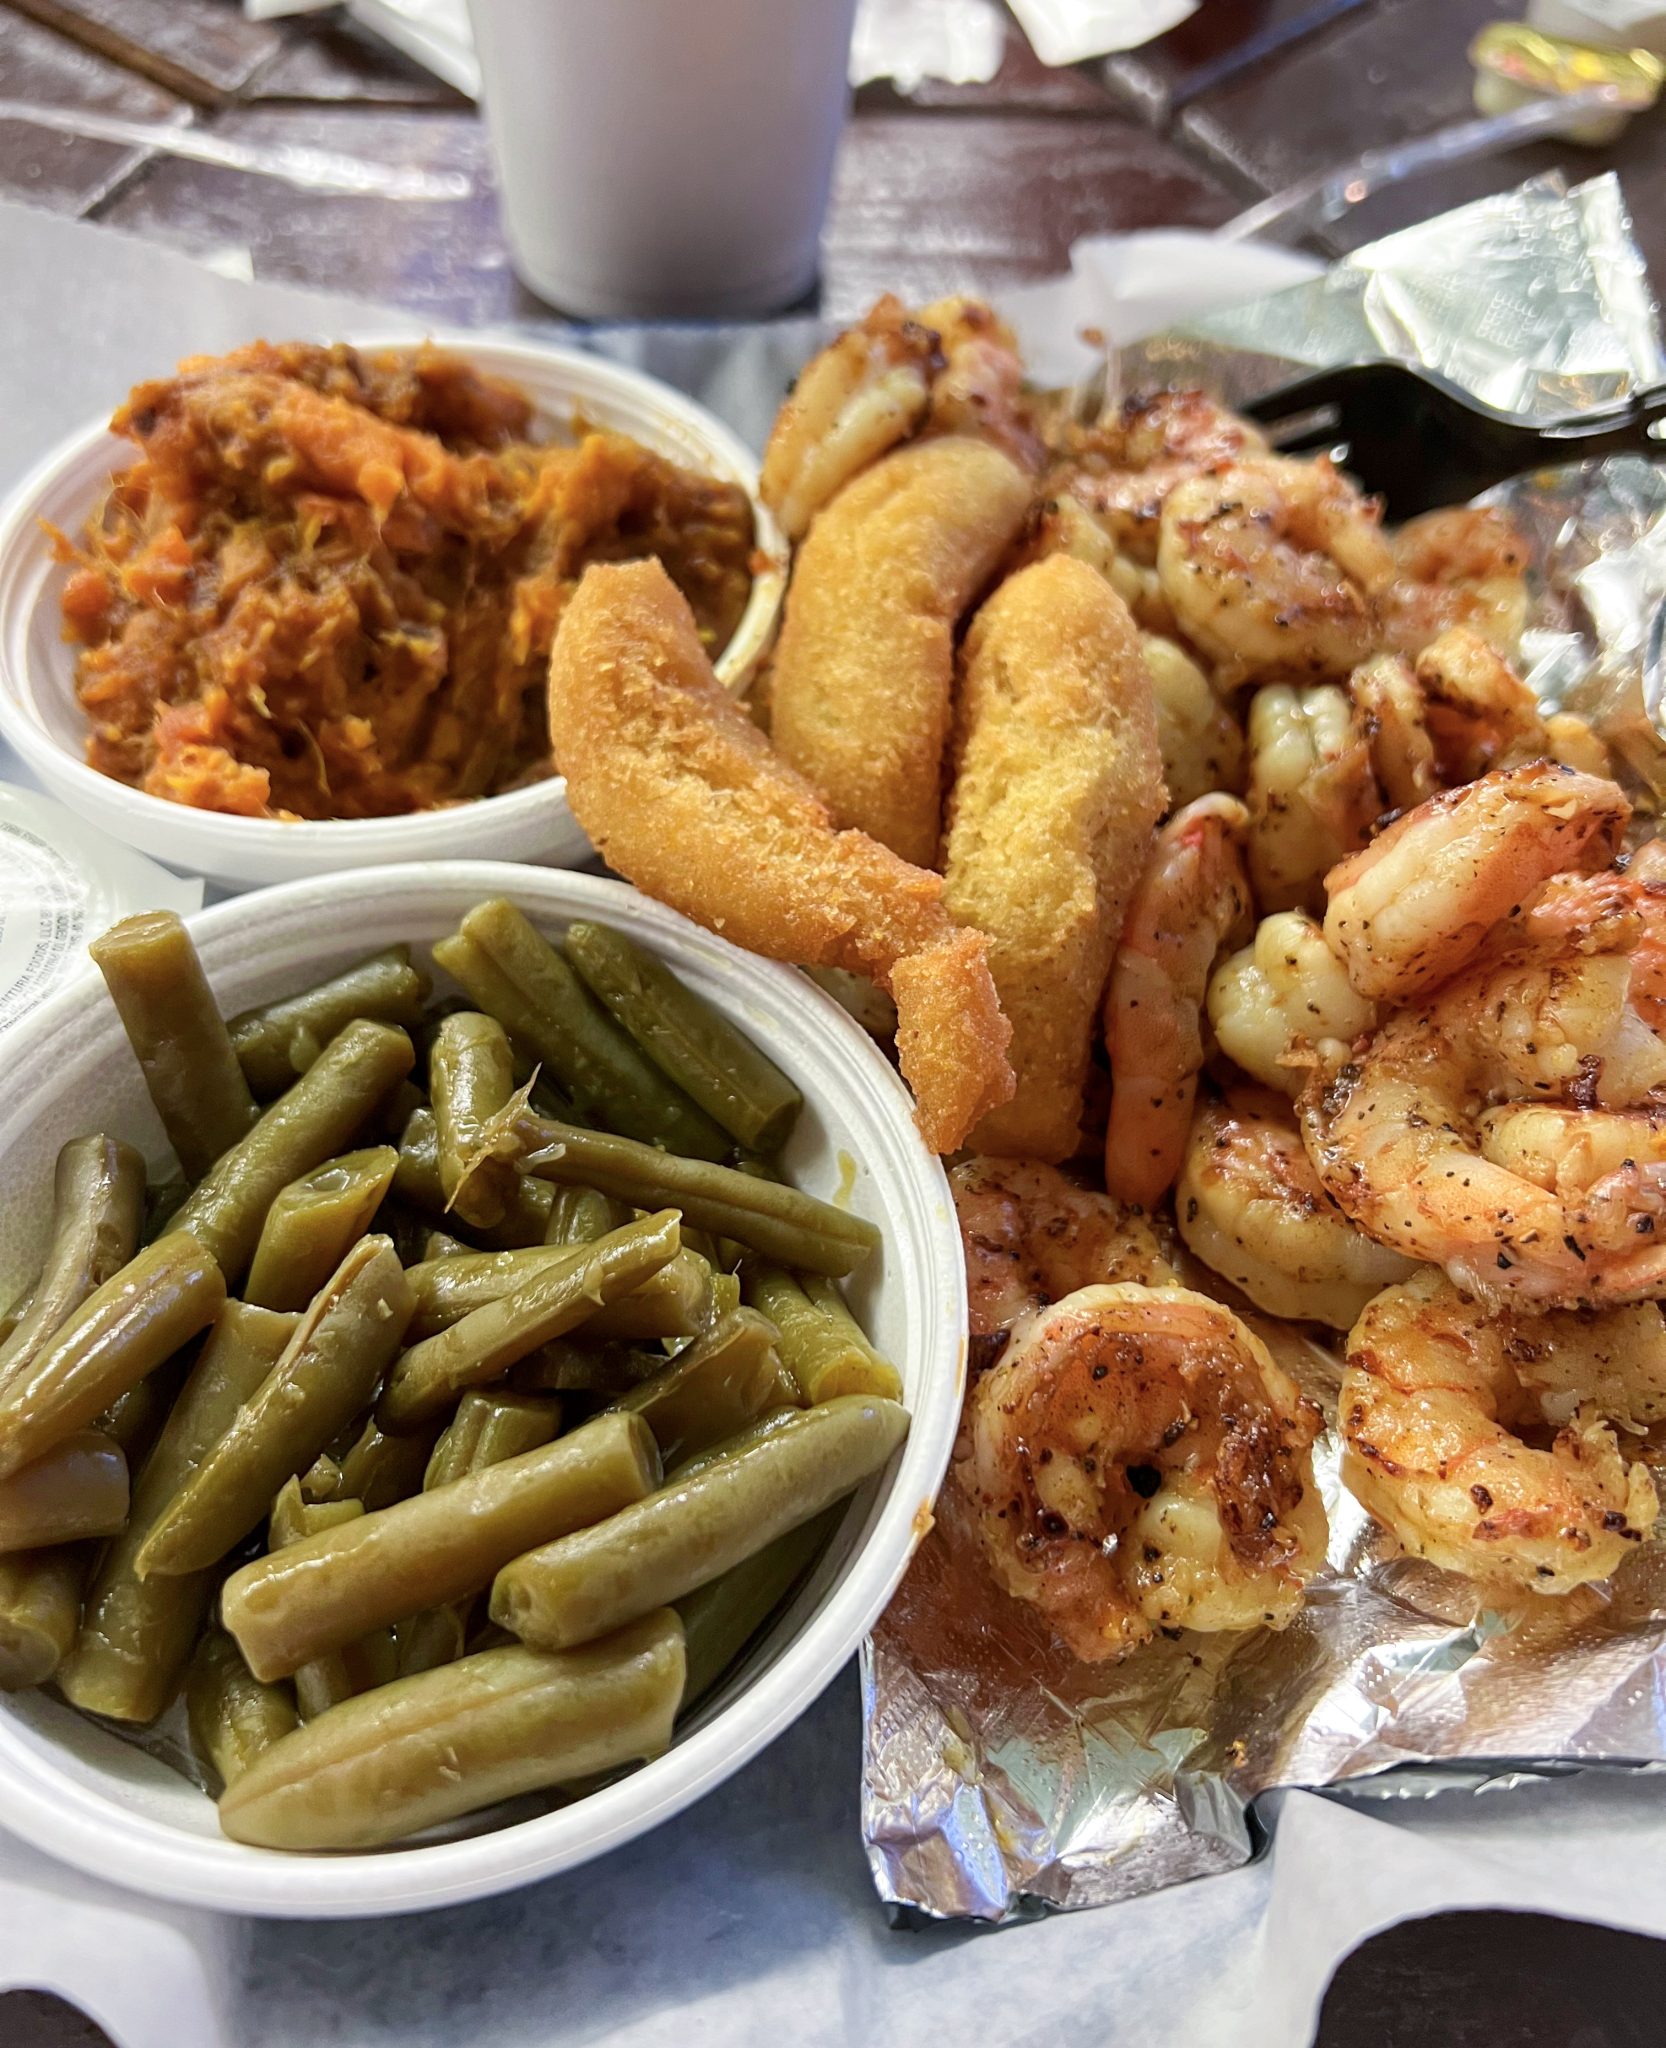 Grilled shrimp, green beans, sweet potato casserole, and hush puppies